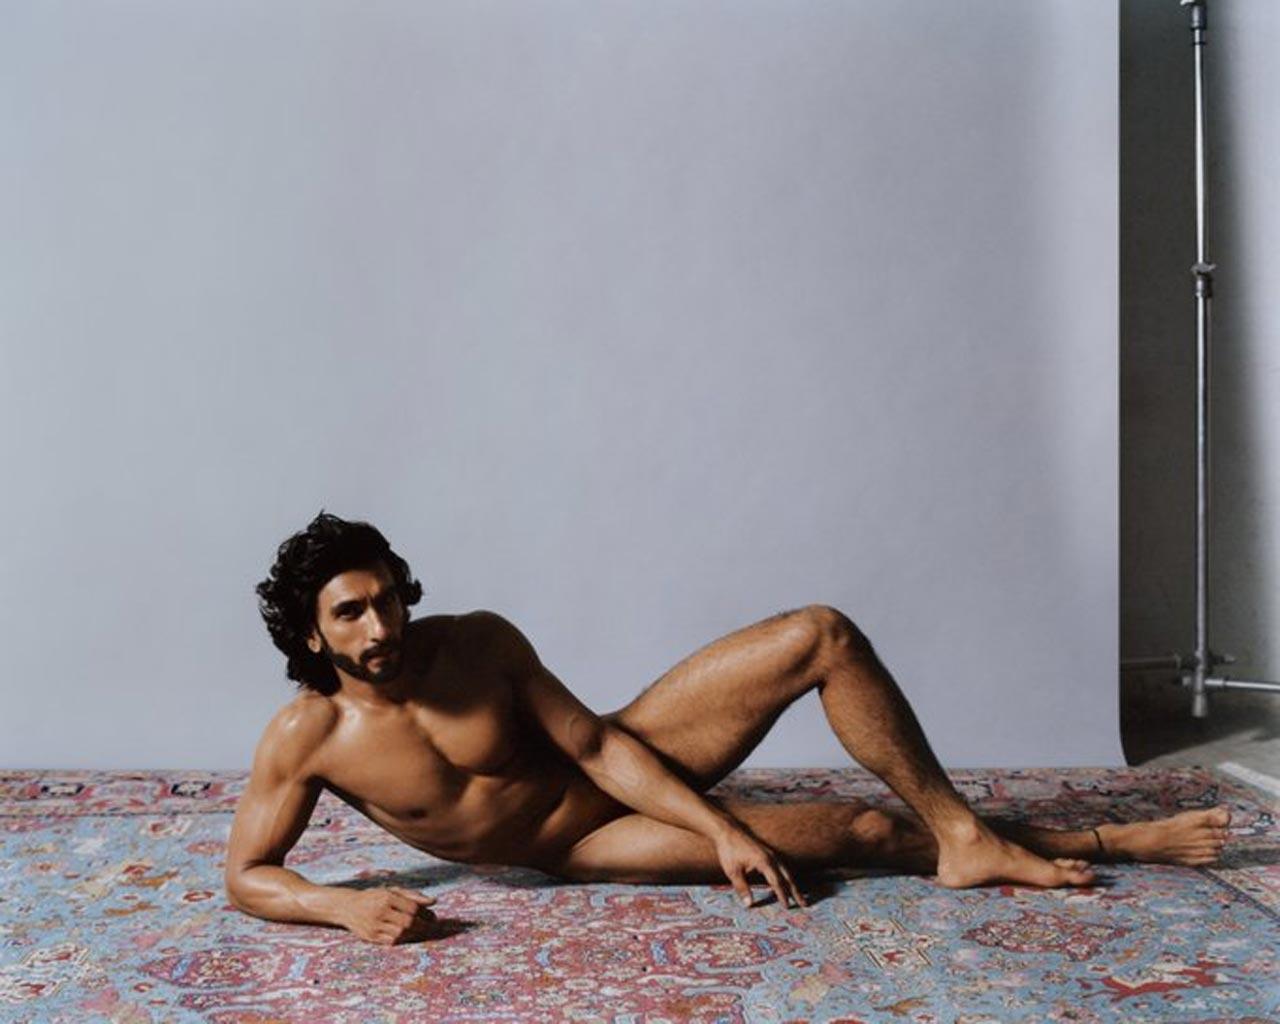 Ranveer Singh
In the tradition of Milind Soman, who did it first with Madhu Sapre, and more recently by himself at a Mumbai beach, Ranveer is breaking the Internet by posing in the buff for Ashish Shah of 'Paper' magazine, flaunting his ripped body and toned muscles, looking straight out of an ancient Greek statue (Pictures: Paper Magazine's Instagram account)